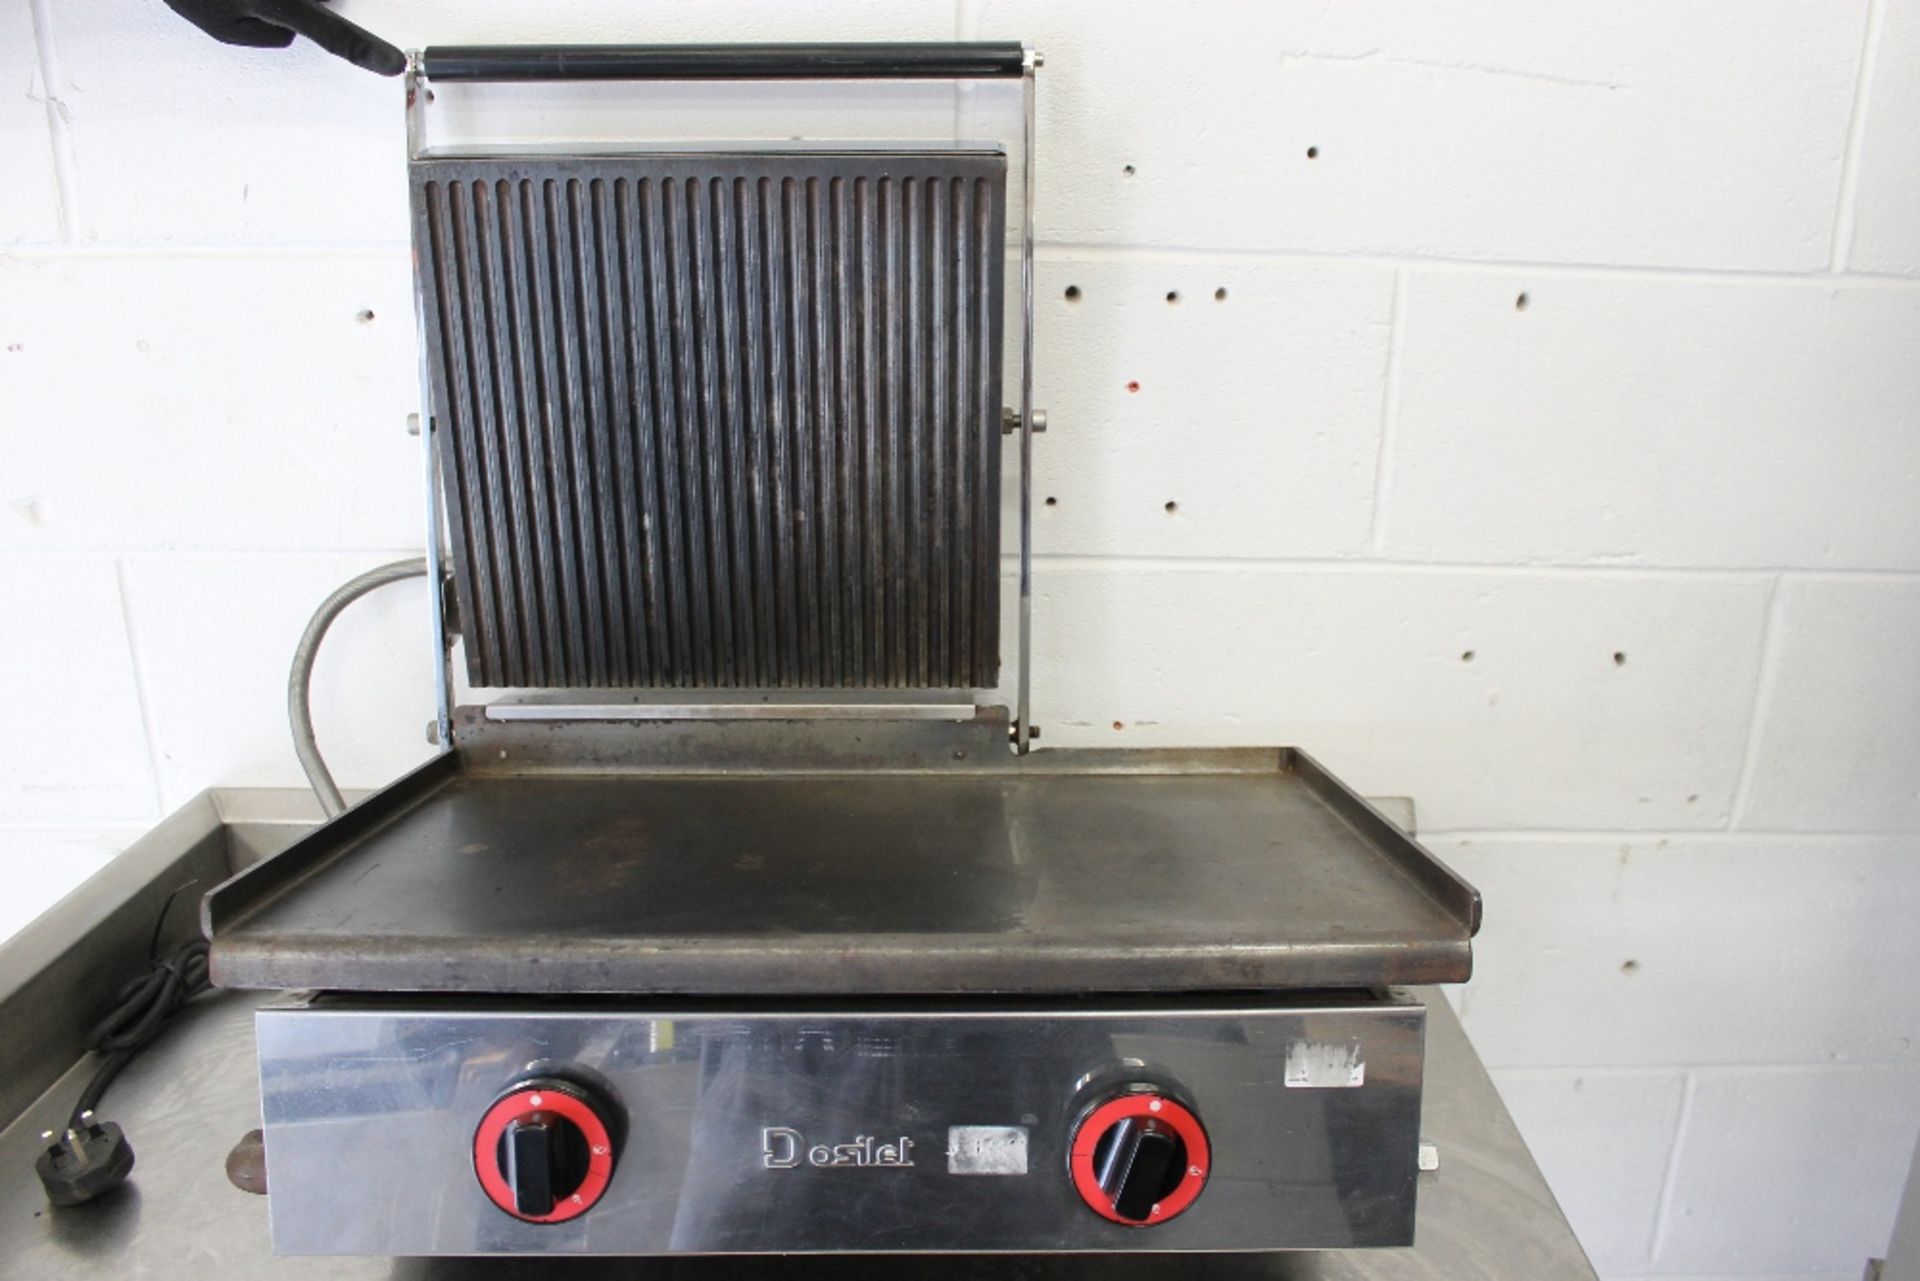 Dualit Large Panini Grill -Ribbed Top Plate – Flat Bottom Plate -1ph – Tested Working